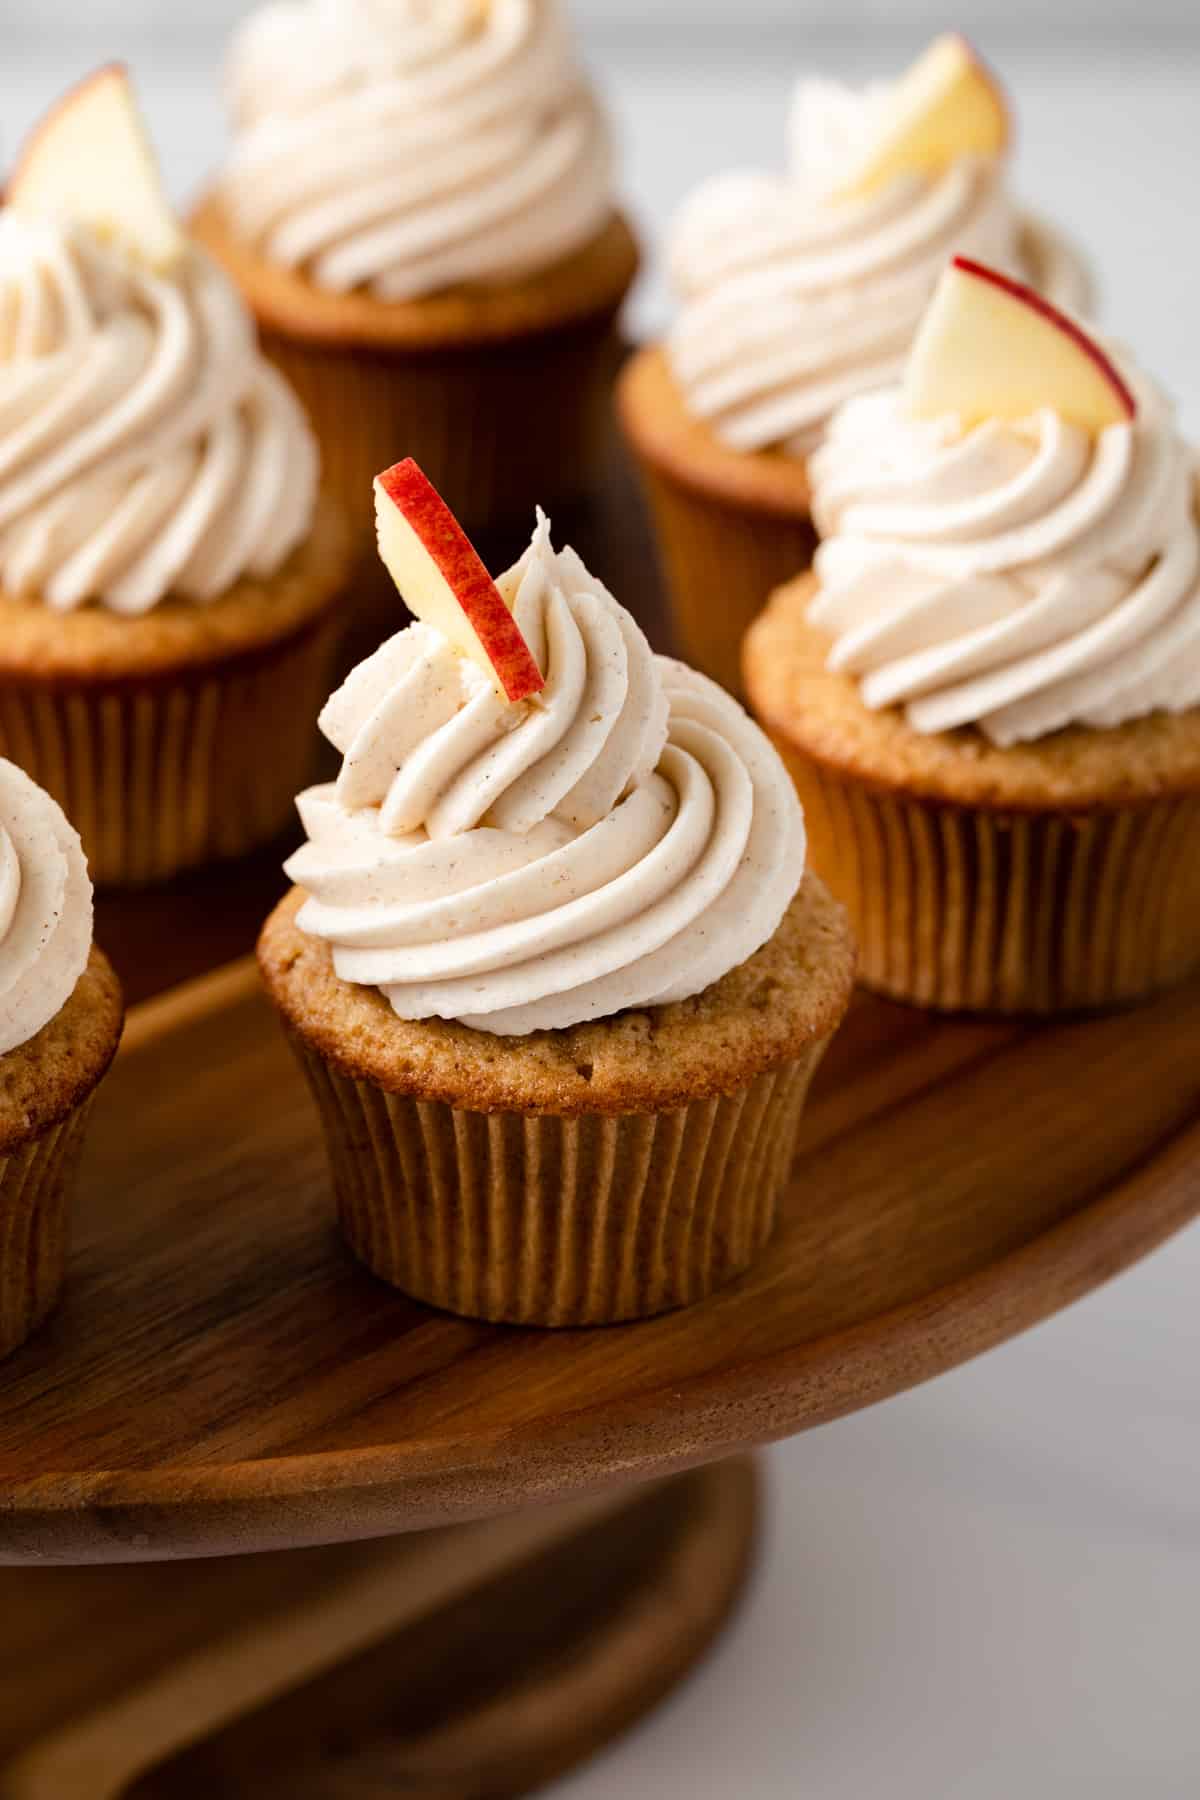 Spiced apple cupcakes topped with cinnamon buttercream frosting